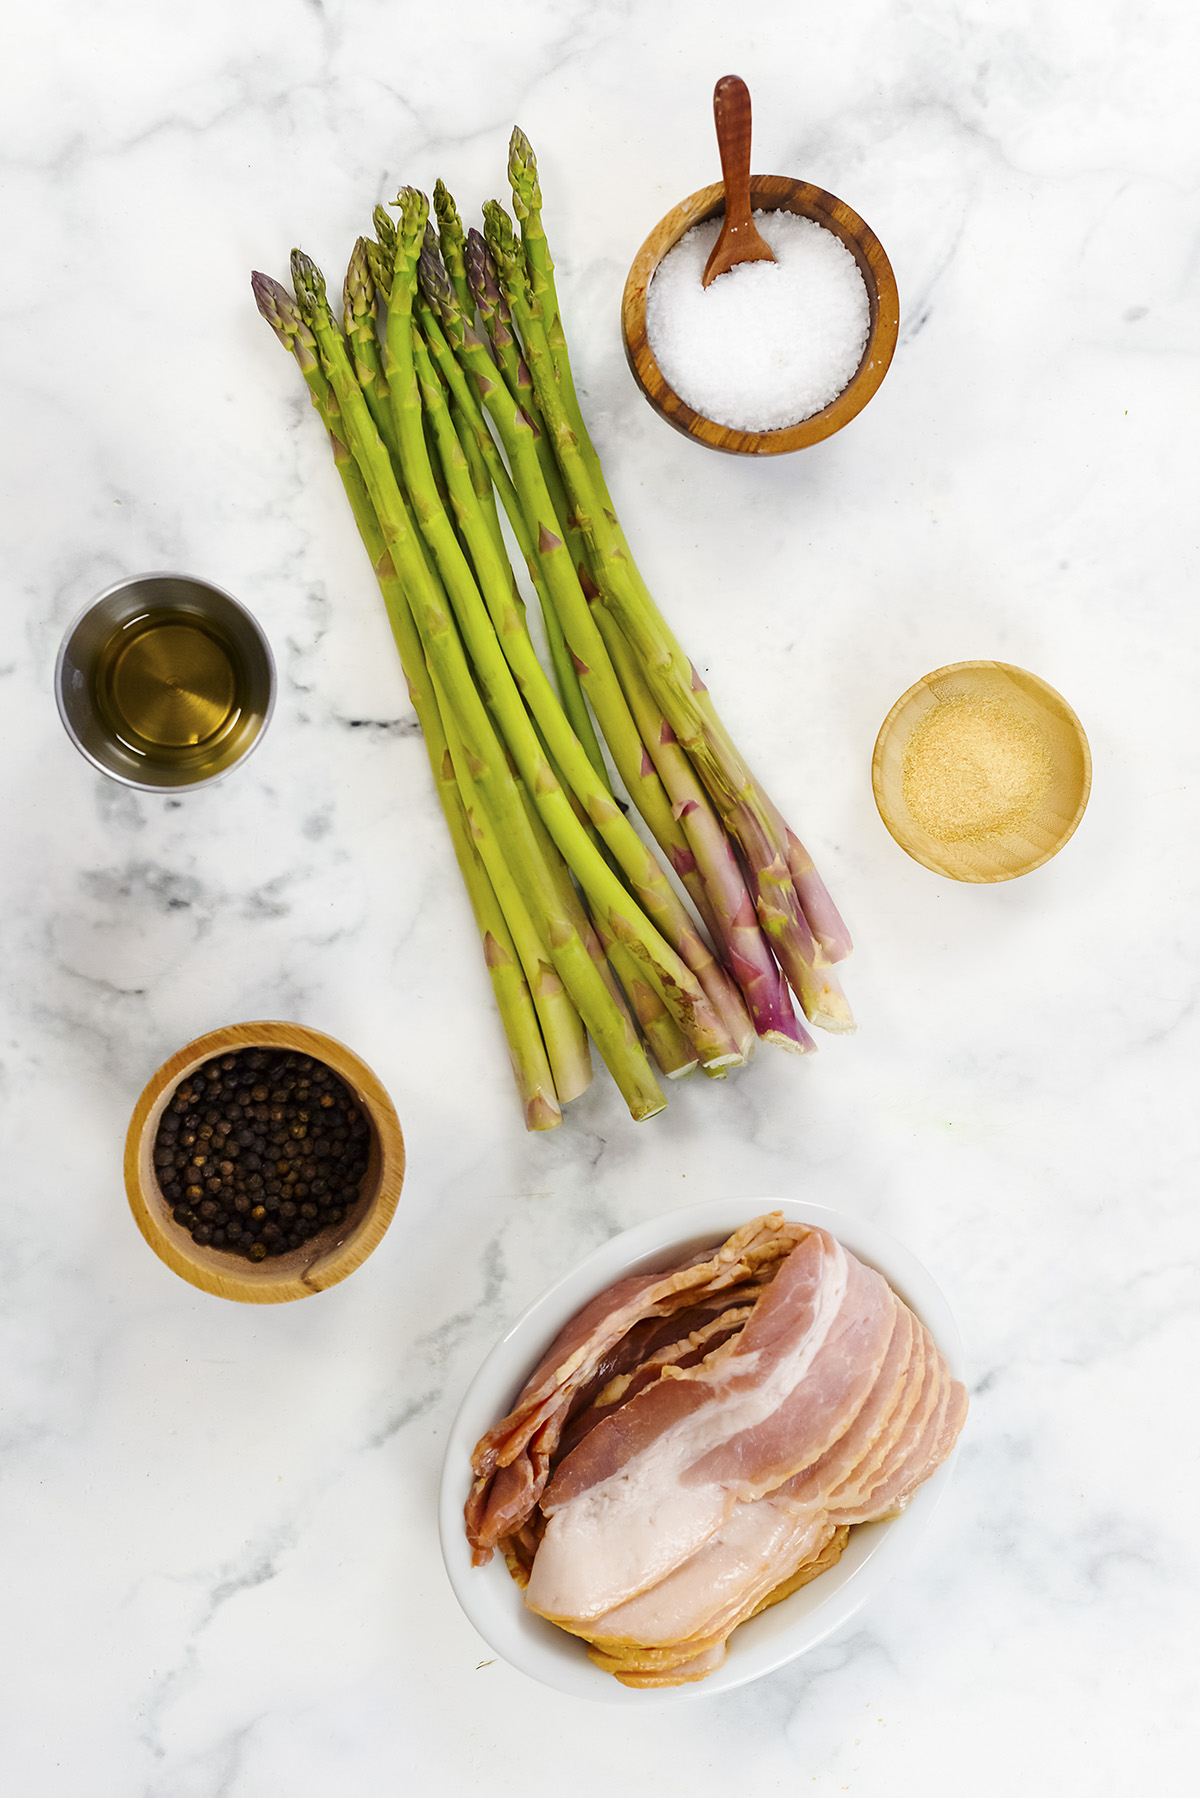 Ingredients for bacon wrapped asparagus on a white countertop.